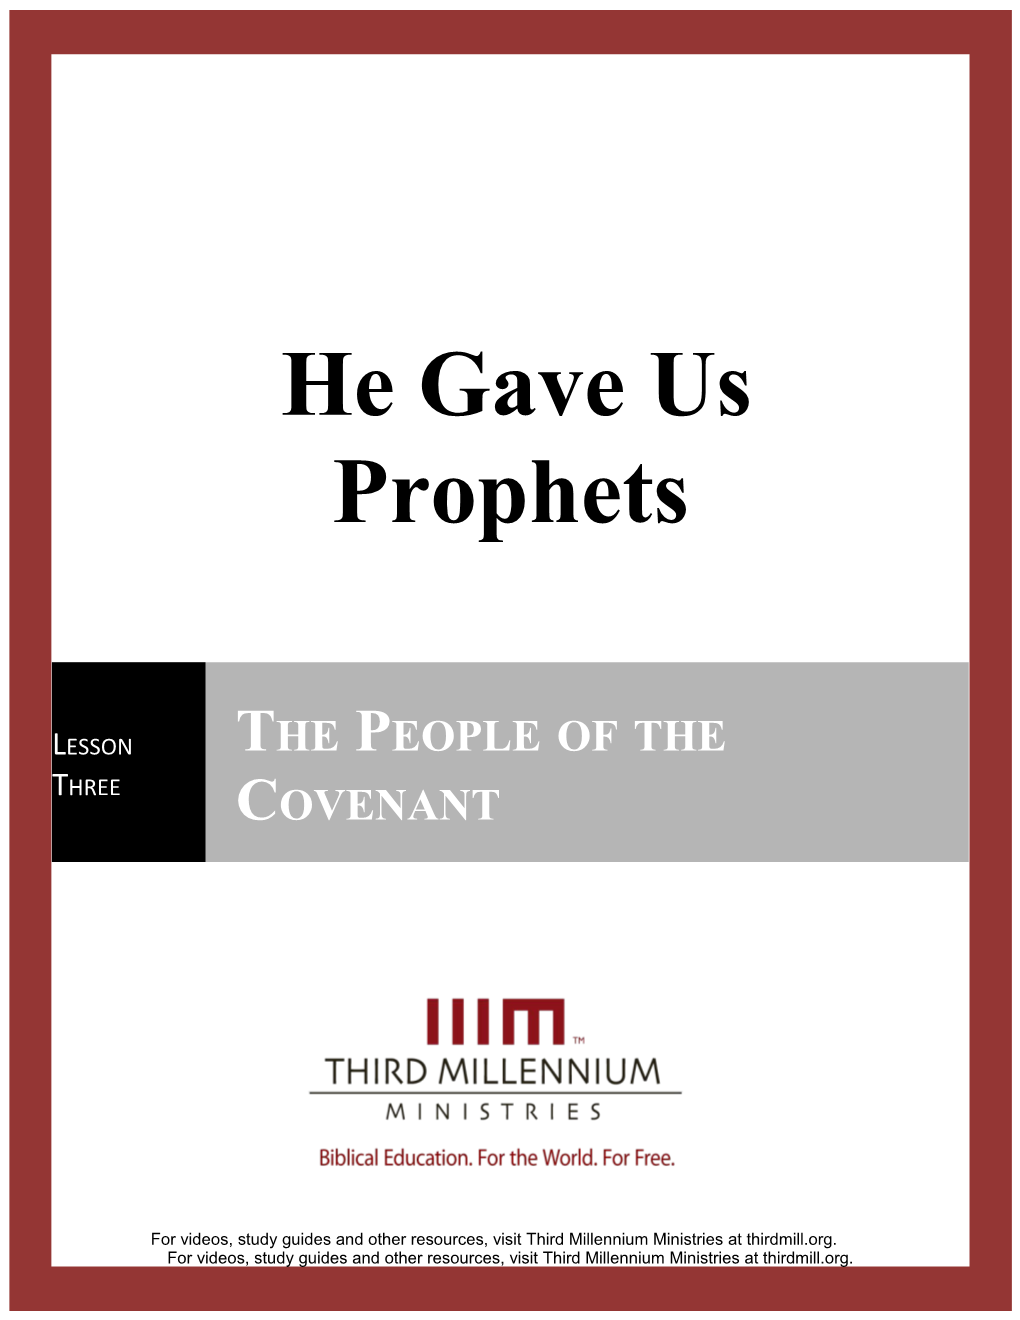 He Gave Us Prophets, Lesson 3